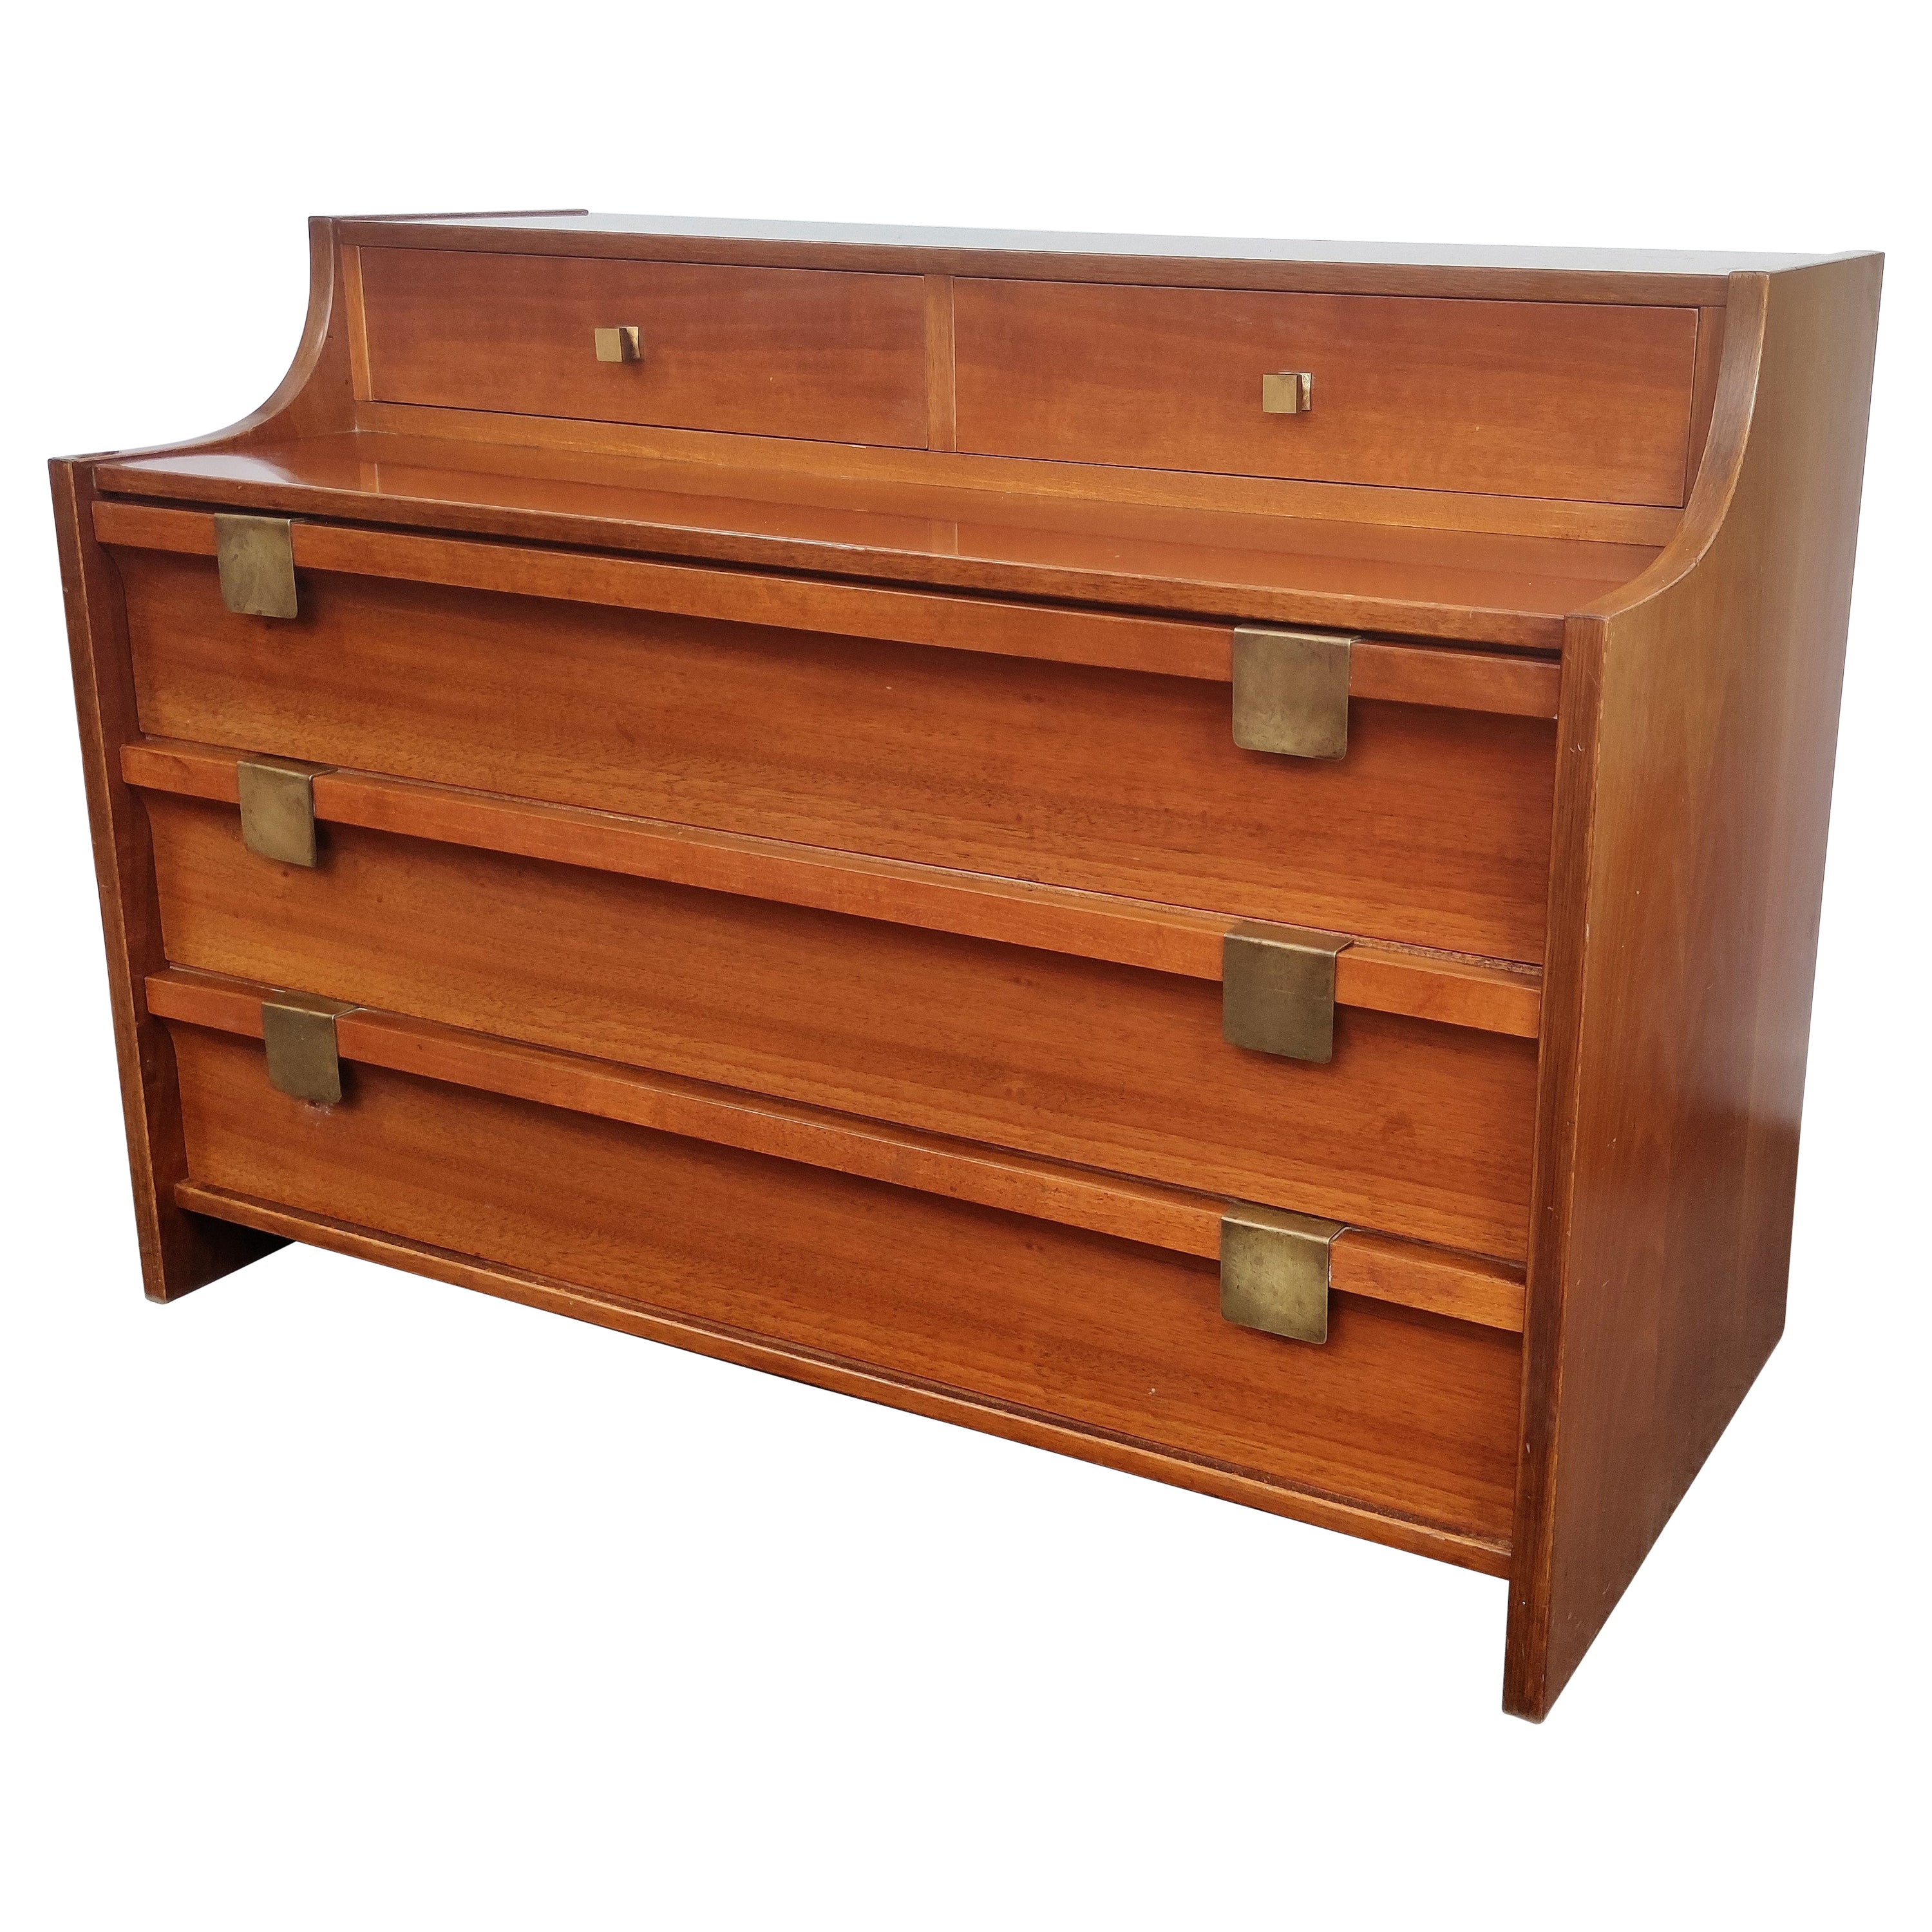 1960s Italian Mid-Century Modern Wood and Brass Commode Dresser Chest of Drawers